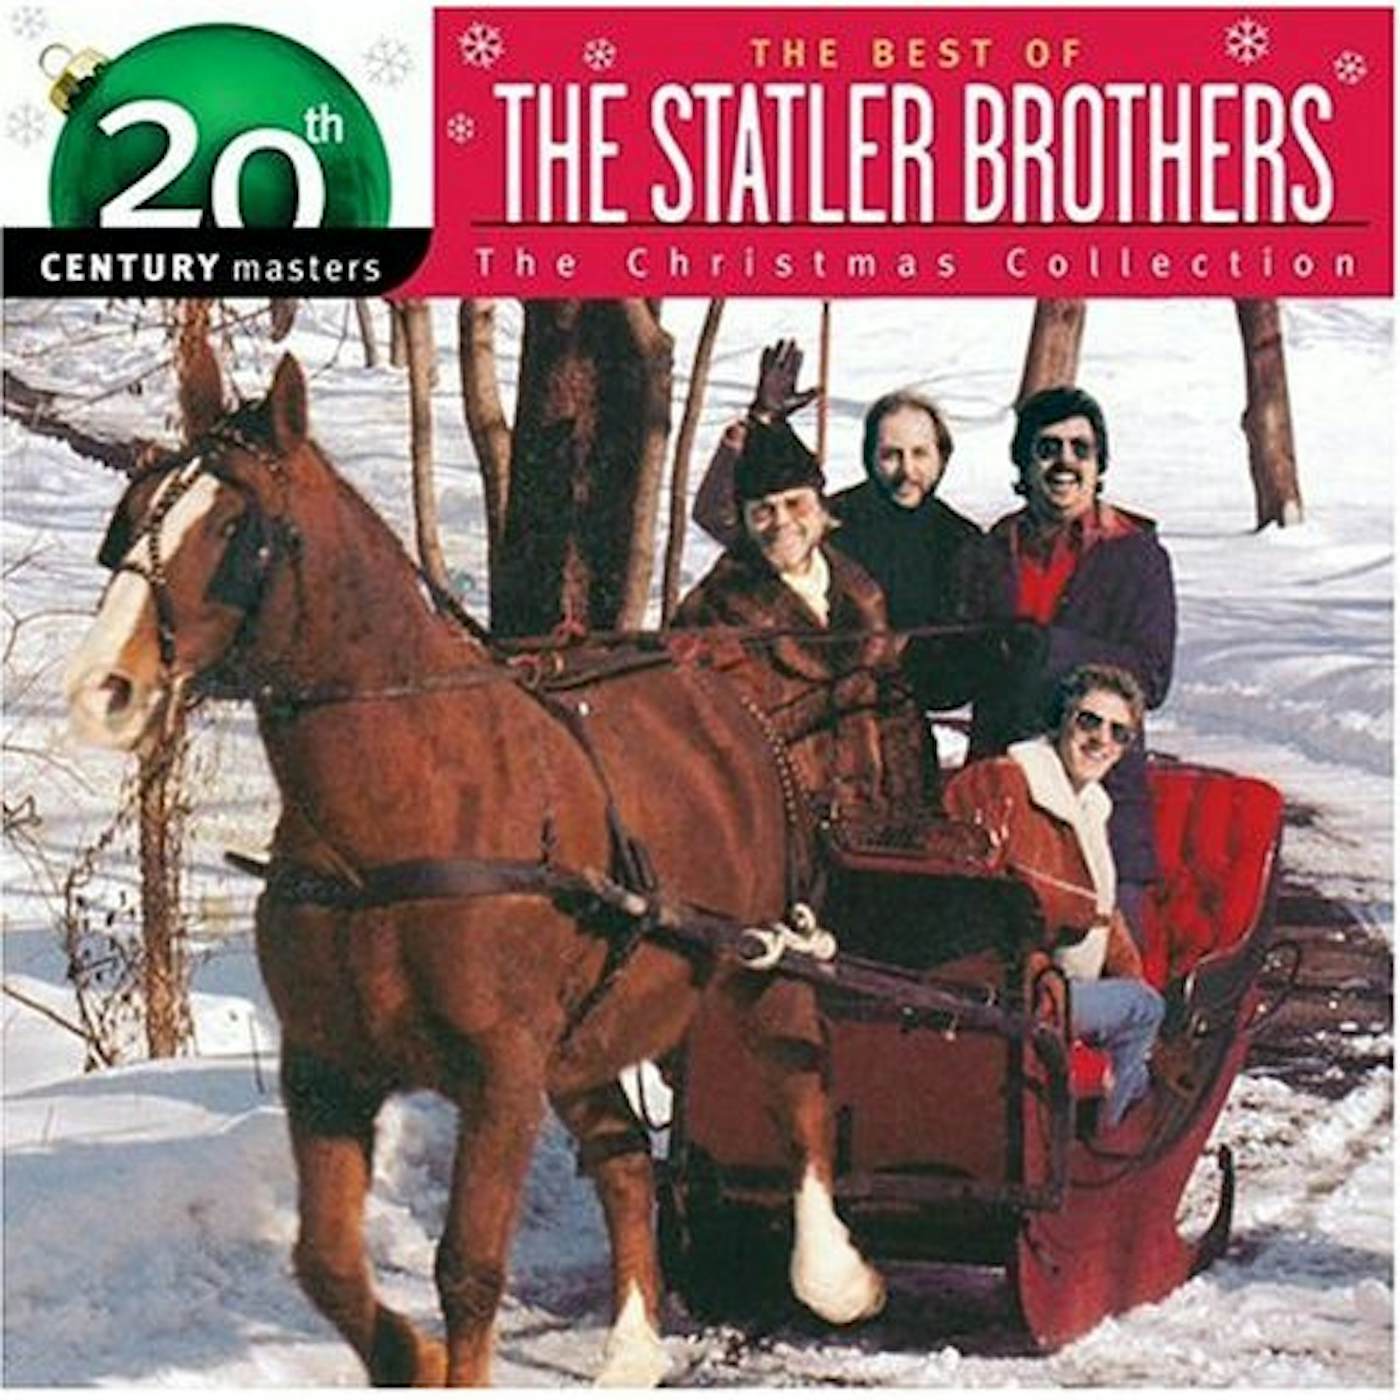 The Statler Brothers CHRISTMAS COLLECTION: 20TH CENTURY MASTERS CD